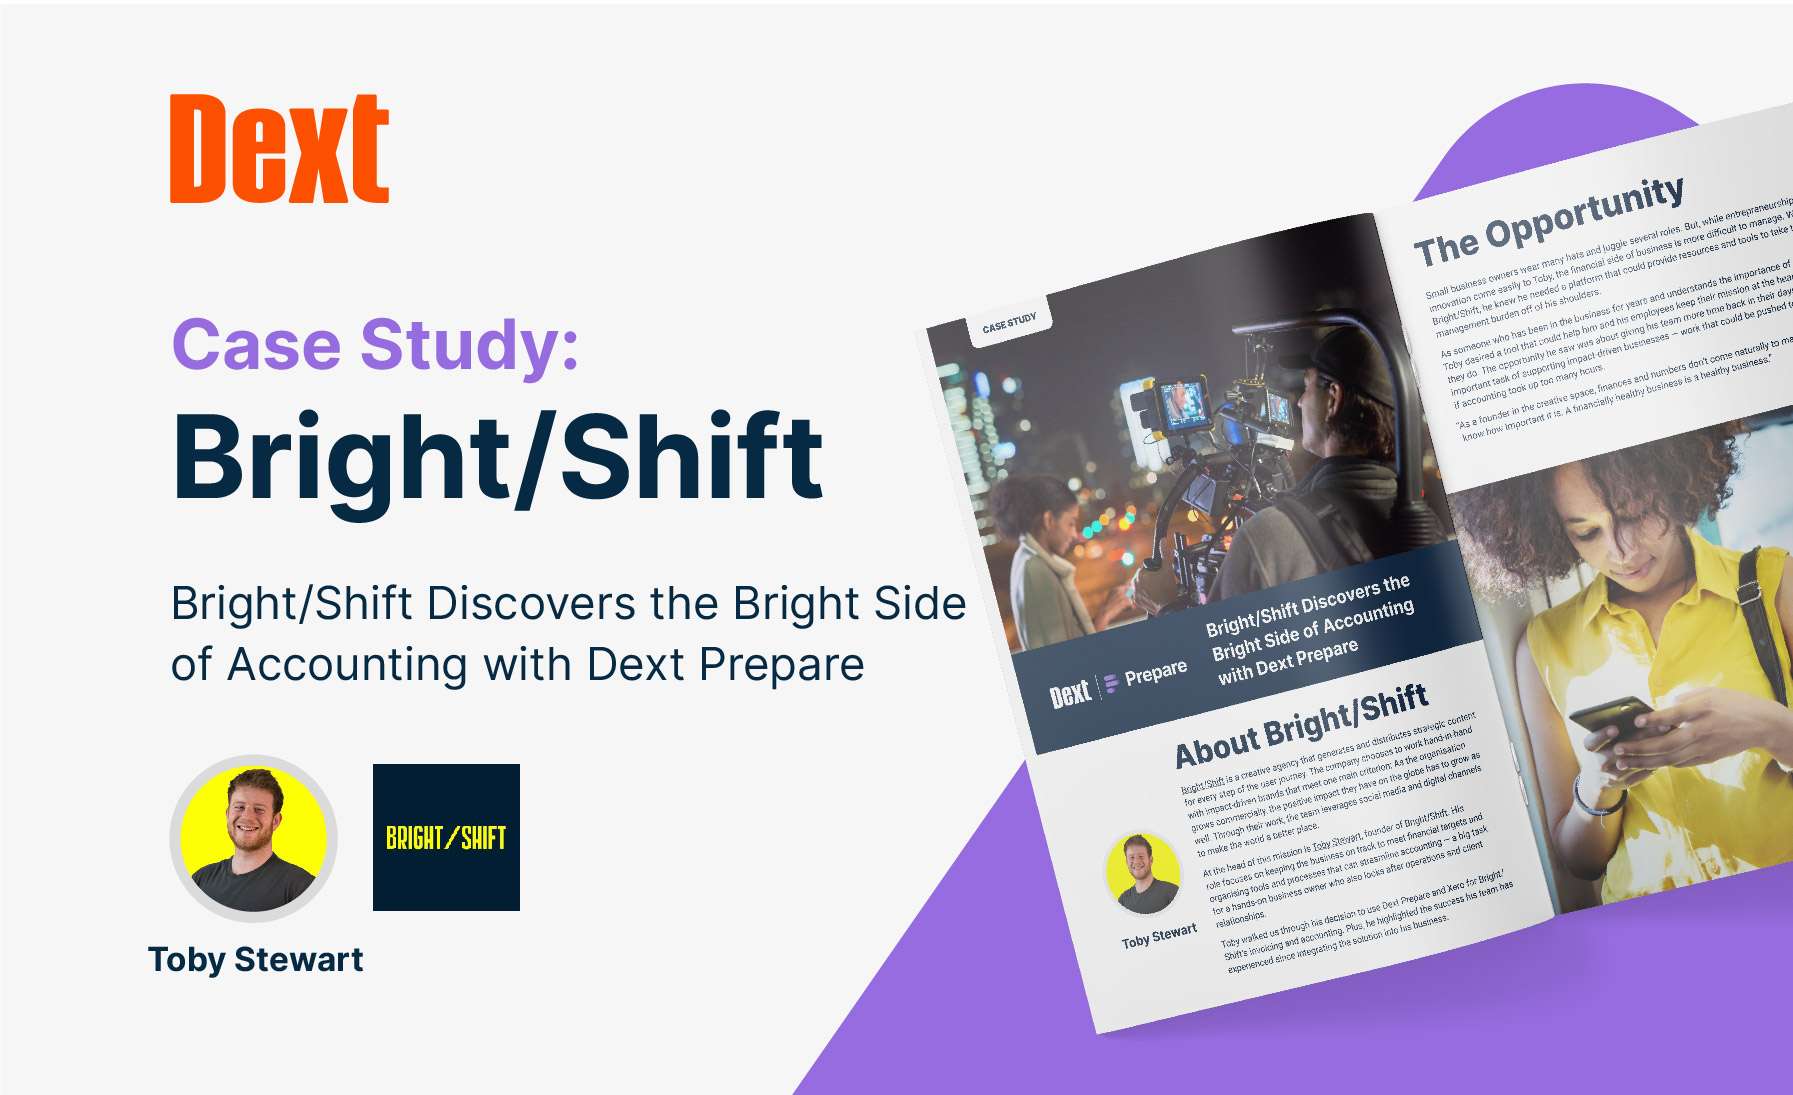 Bright/Shift Discovers the Bright Side of Accounting with Dext Prepare